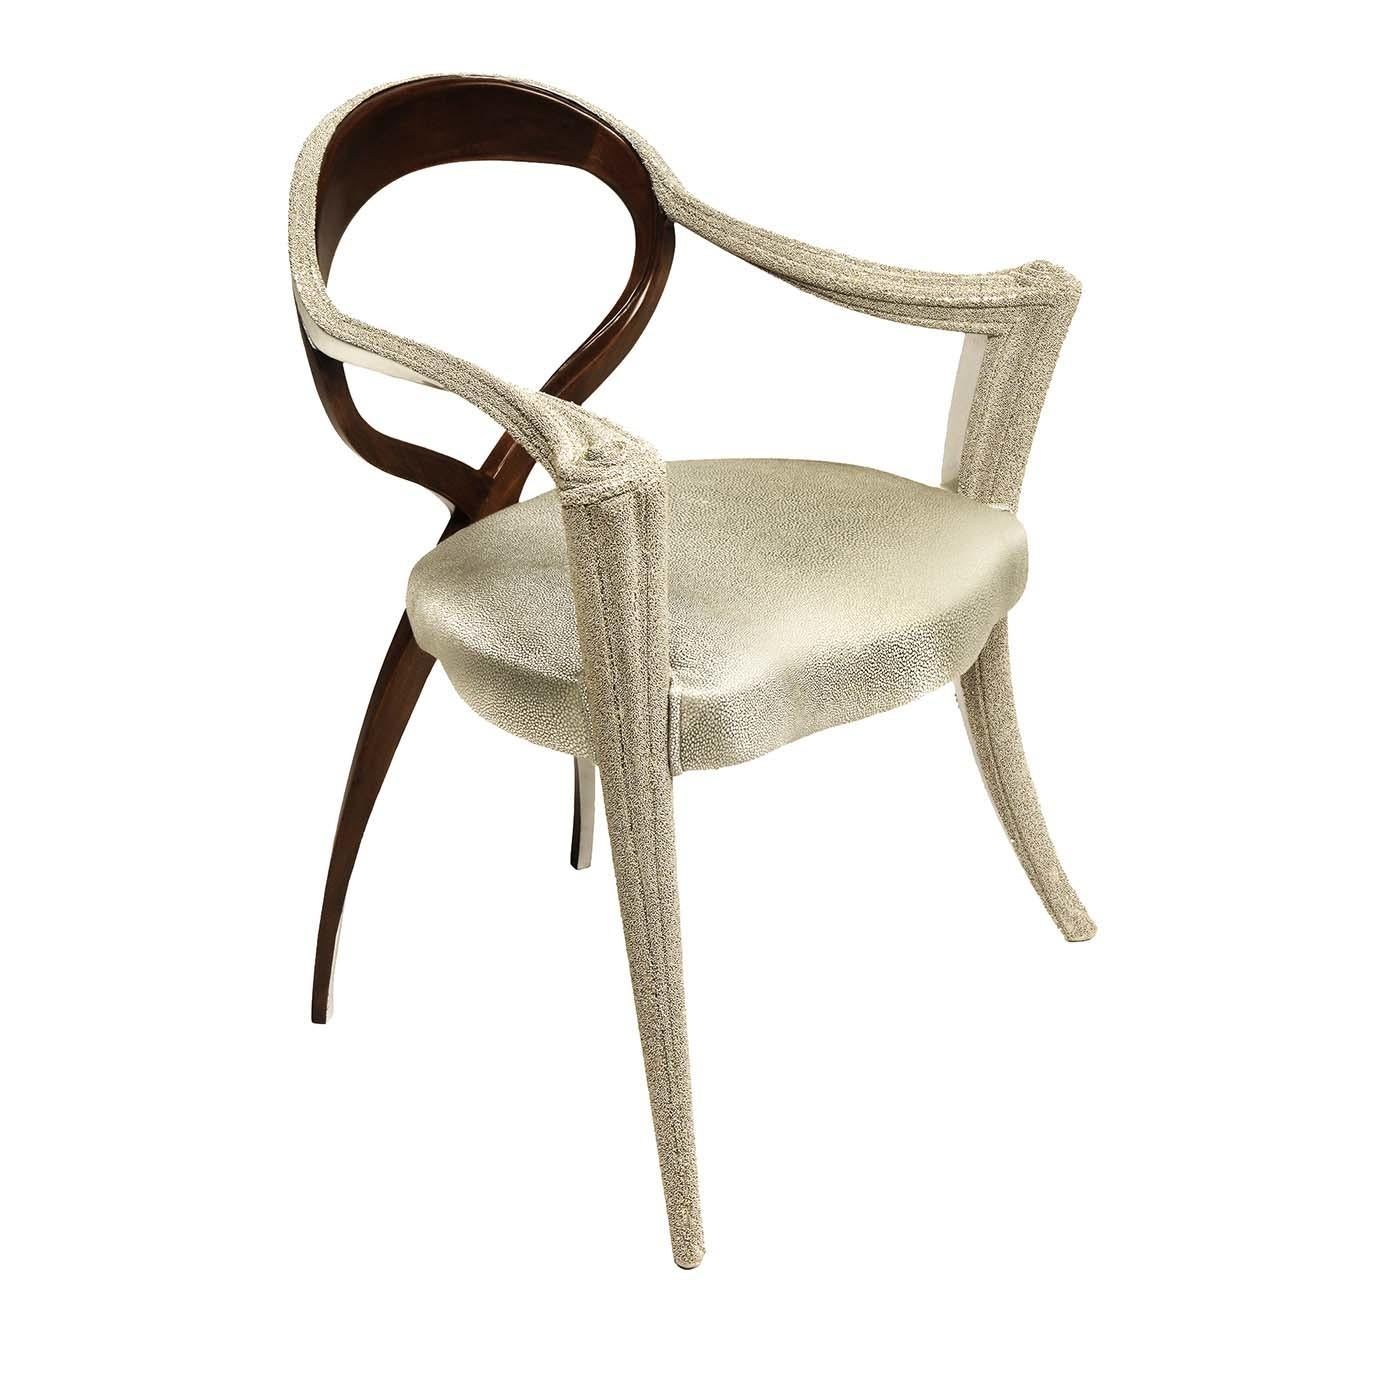 Part of the Opus Futura collection of superb and eclectic seating options, this chair will be a striking addition to a contemporary dining room, entryway or study. Its dynamic silhouette combines front legs and armrests in carved wood with White